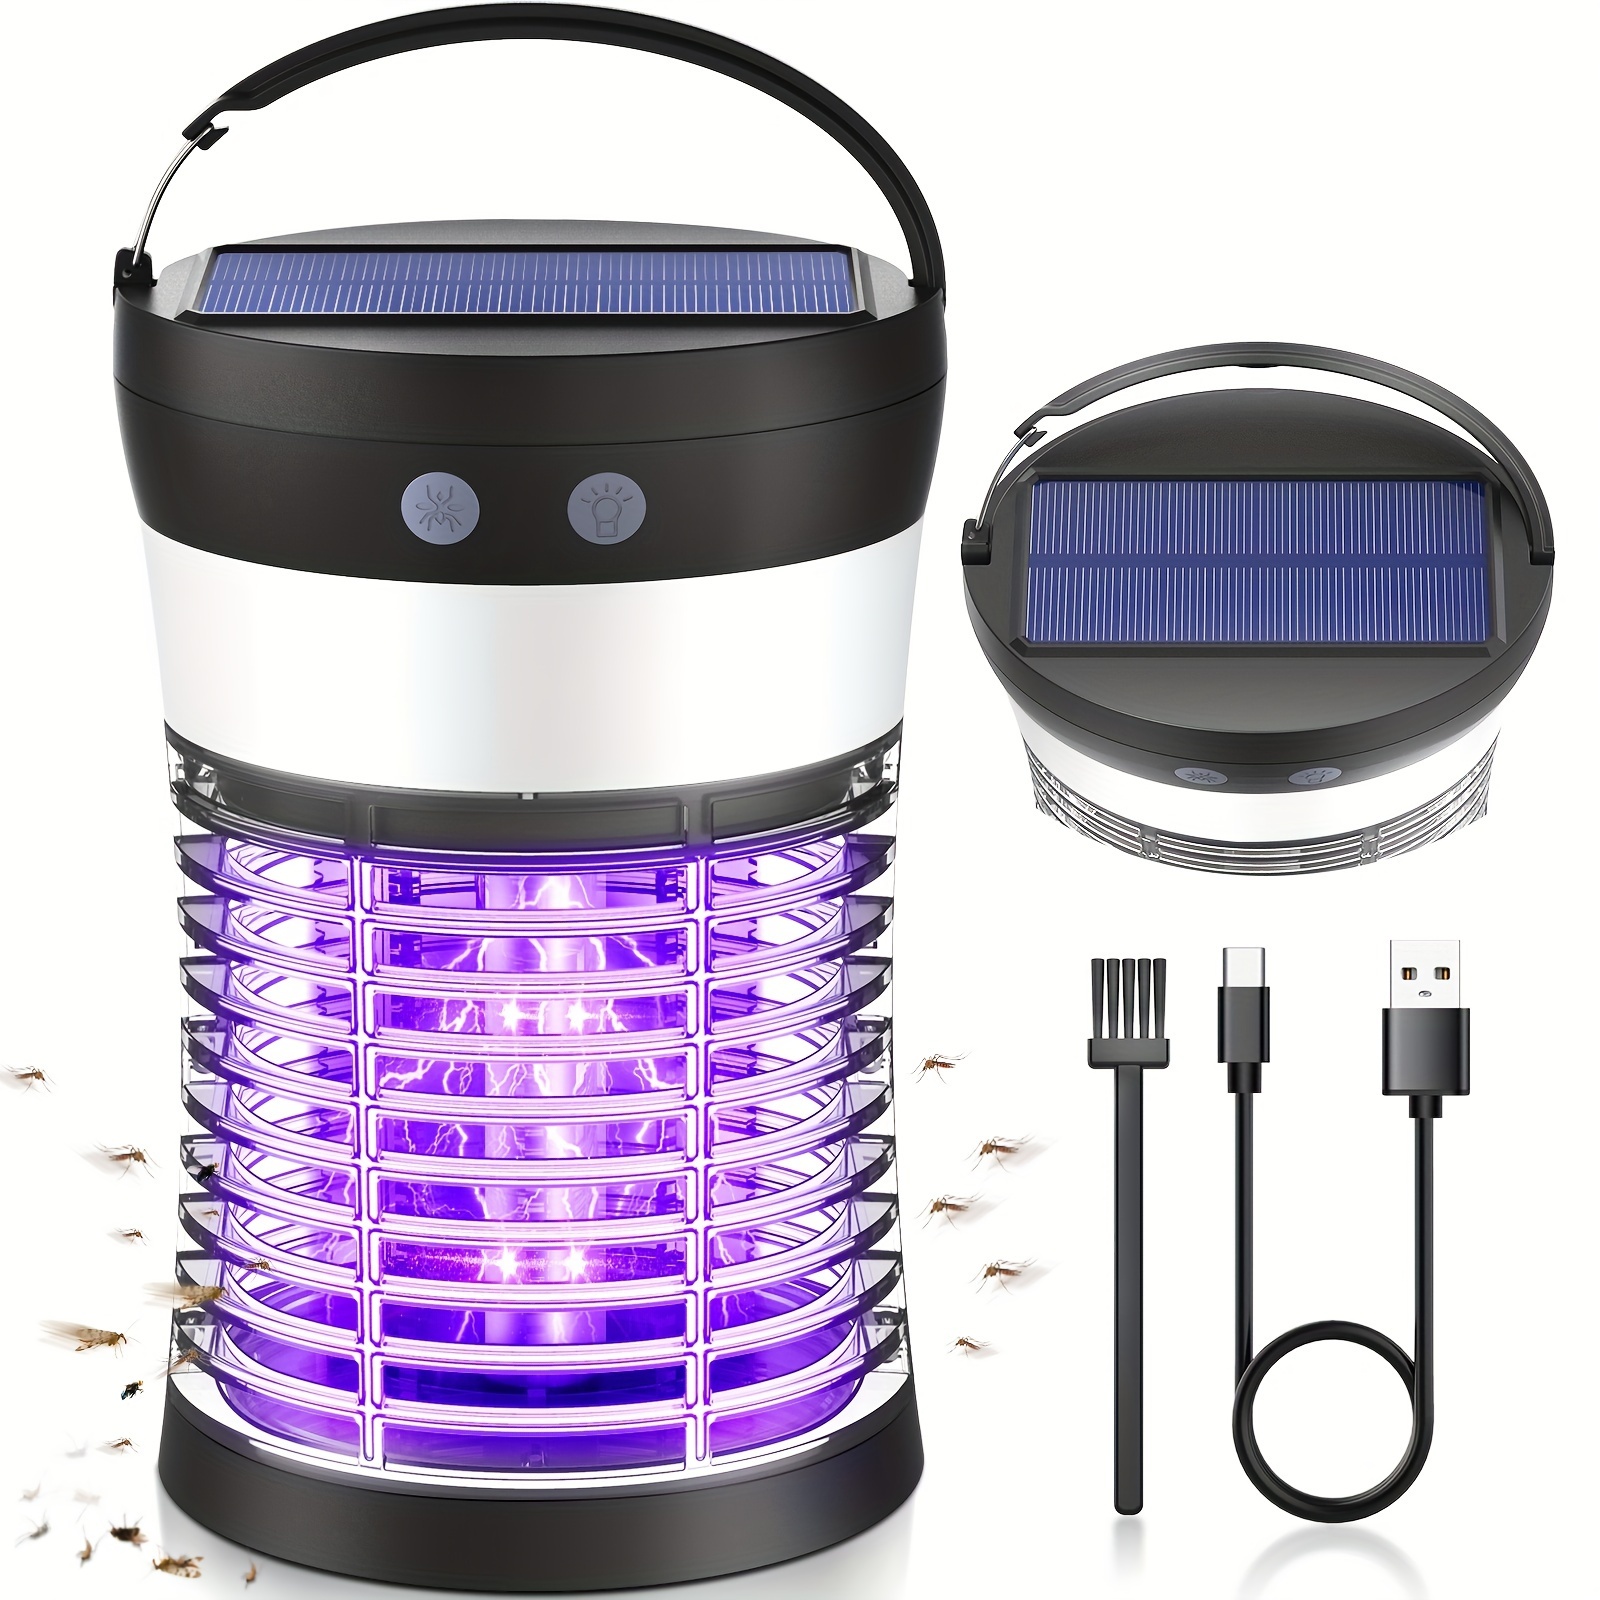 

Solar Bug Zapper, 3 In 1 Electric Mosquito Zapper For Outdoor Indoor, Pest Control Mosquito Zapper, Rechargeable Battery Insect Fly Trap For Home, Kitchen, Patio, Backyard, Camping